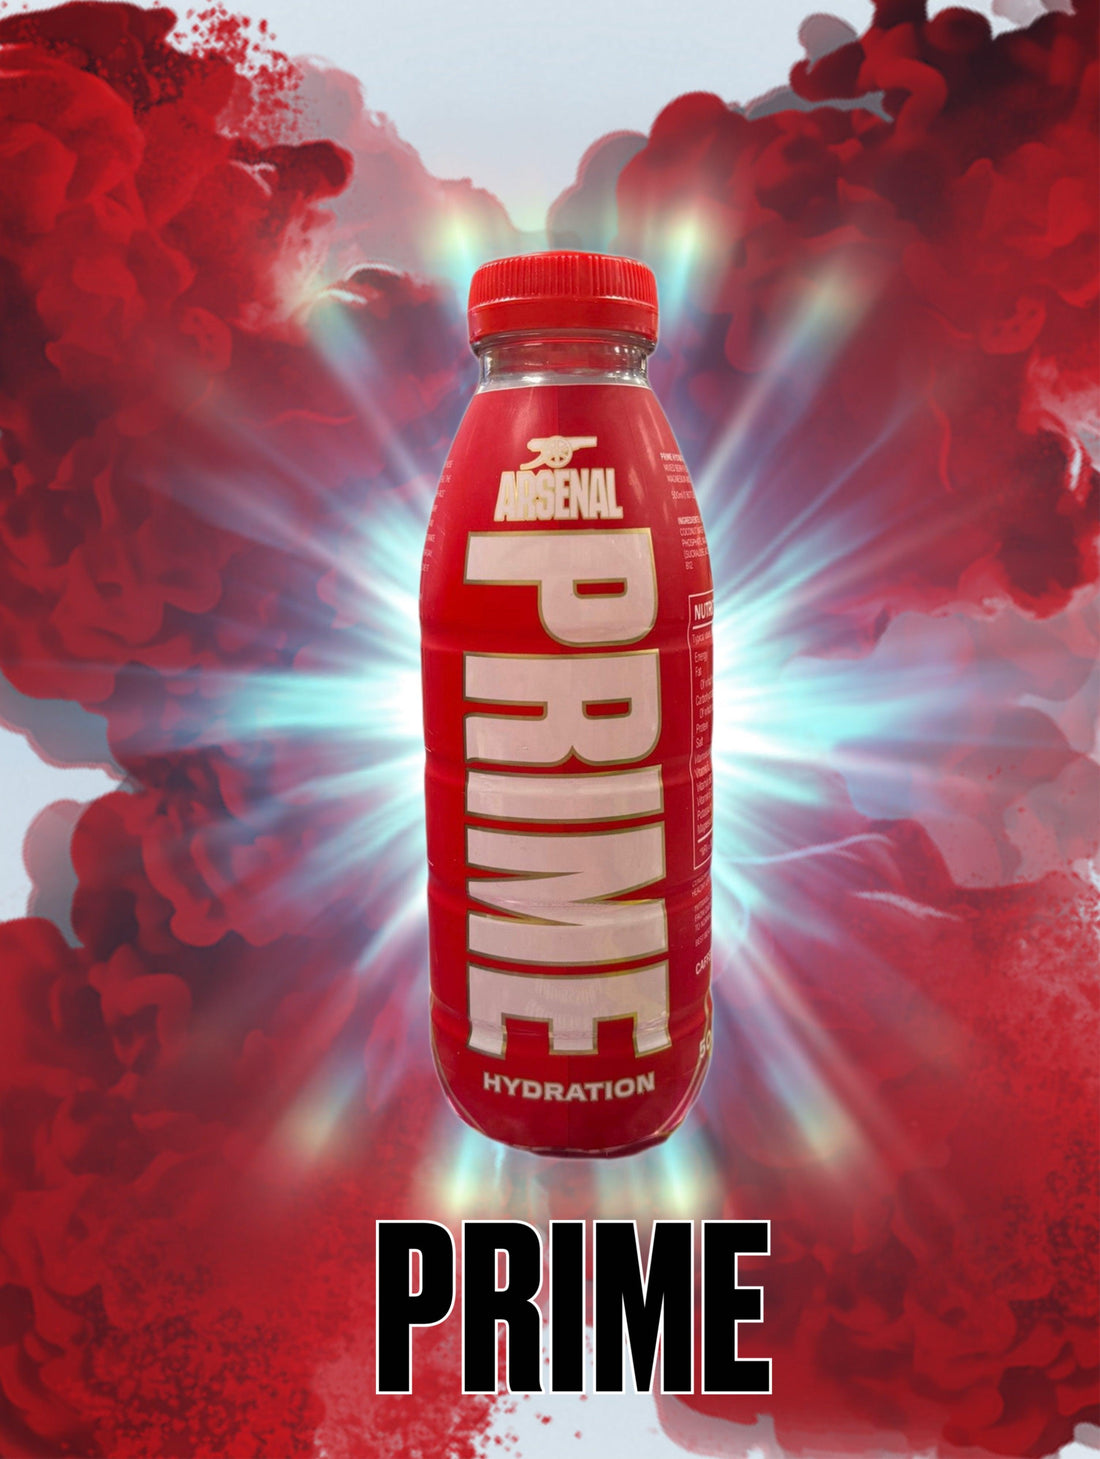 Prime Hydration Arsenal Limited Edition Drink: A Collaboration of Excellence - Extreme Snacks